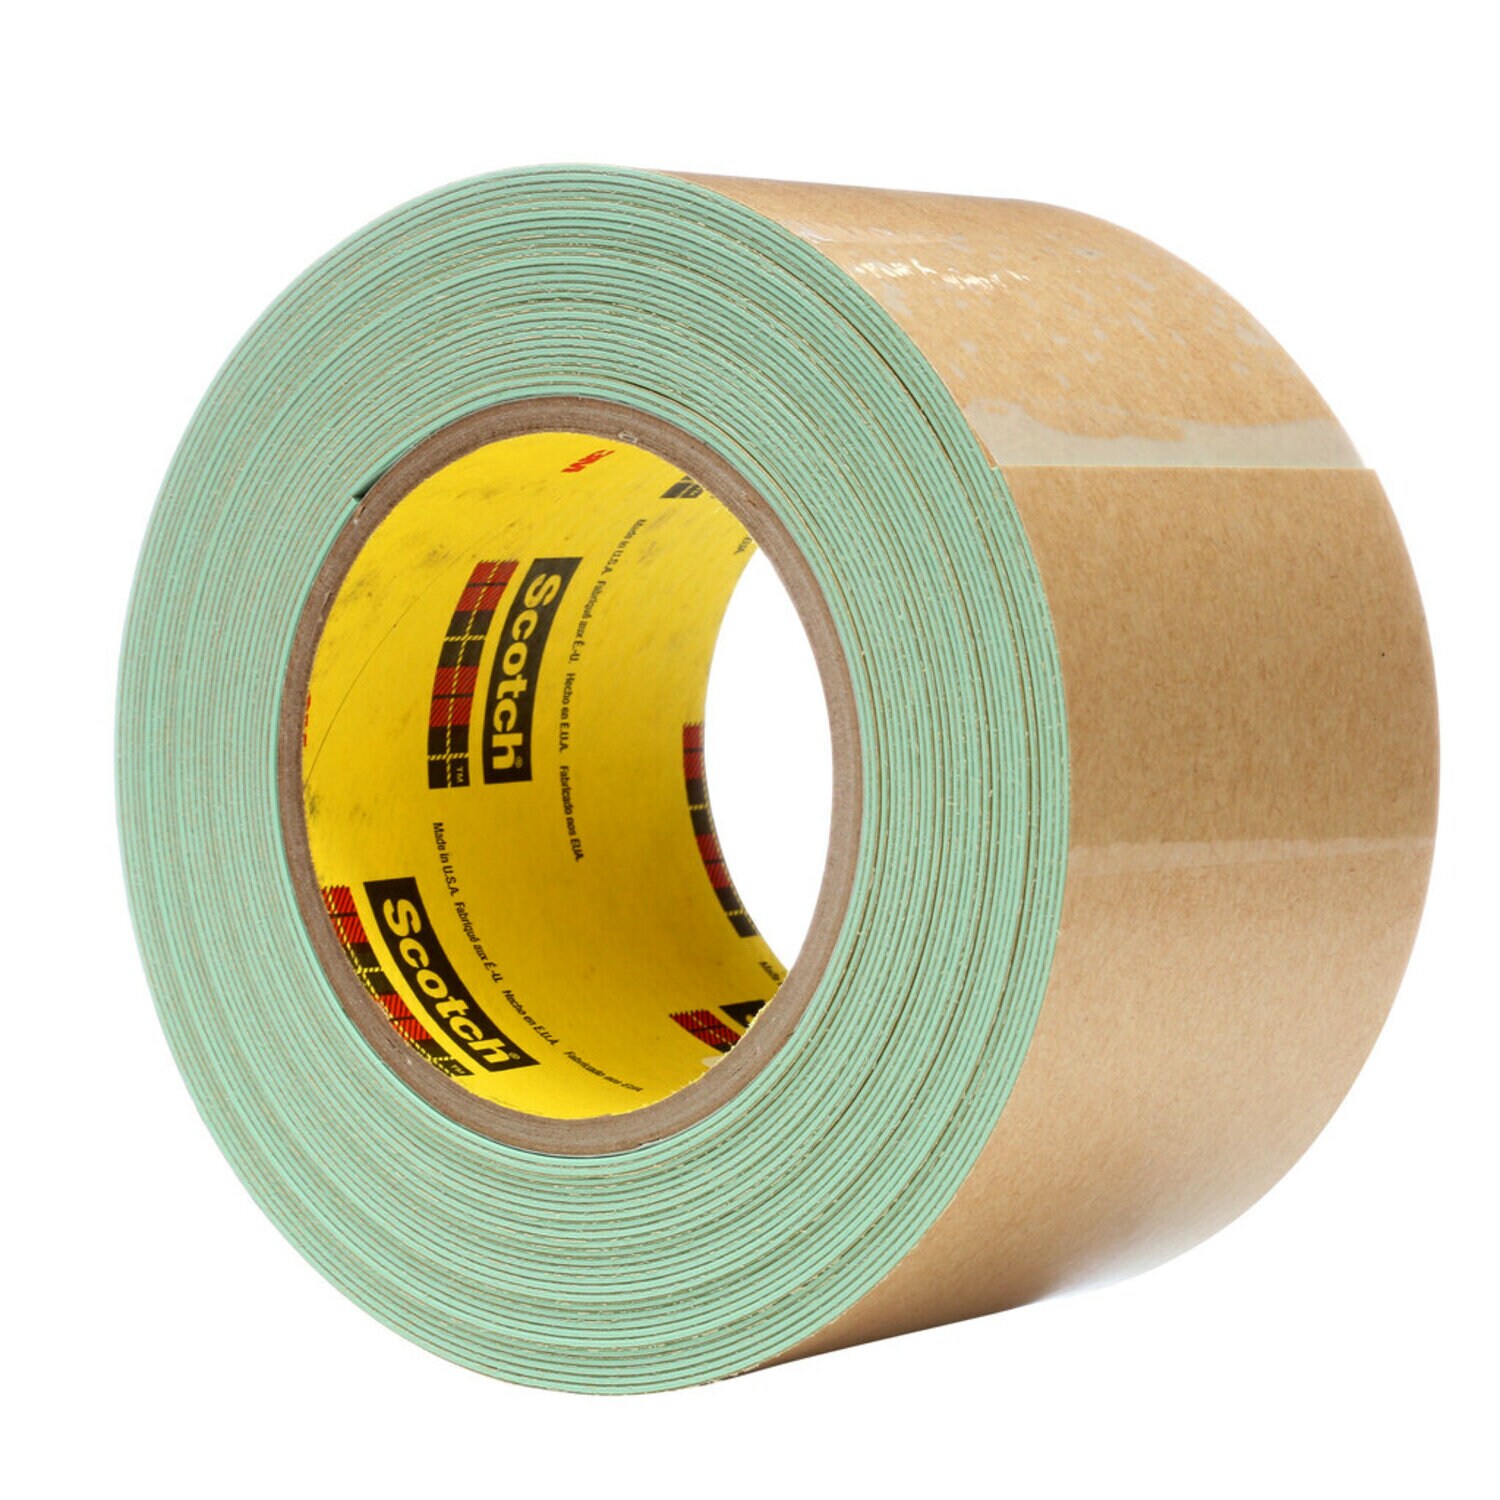 Scotch 665 Double-Sided Permanent Tape with C40 Dispenser 1/2 x 900 Clear